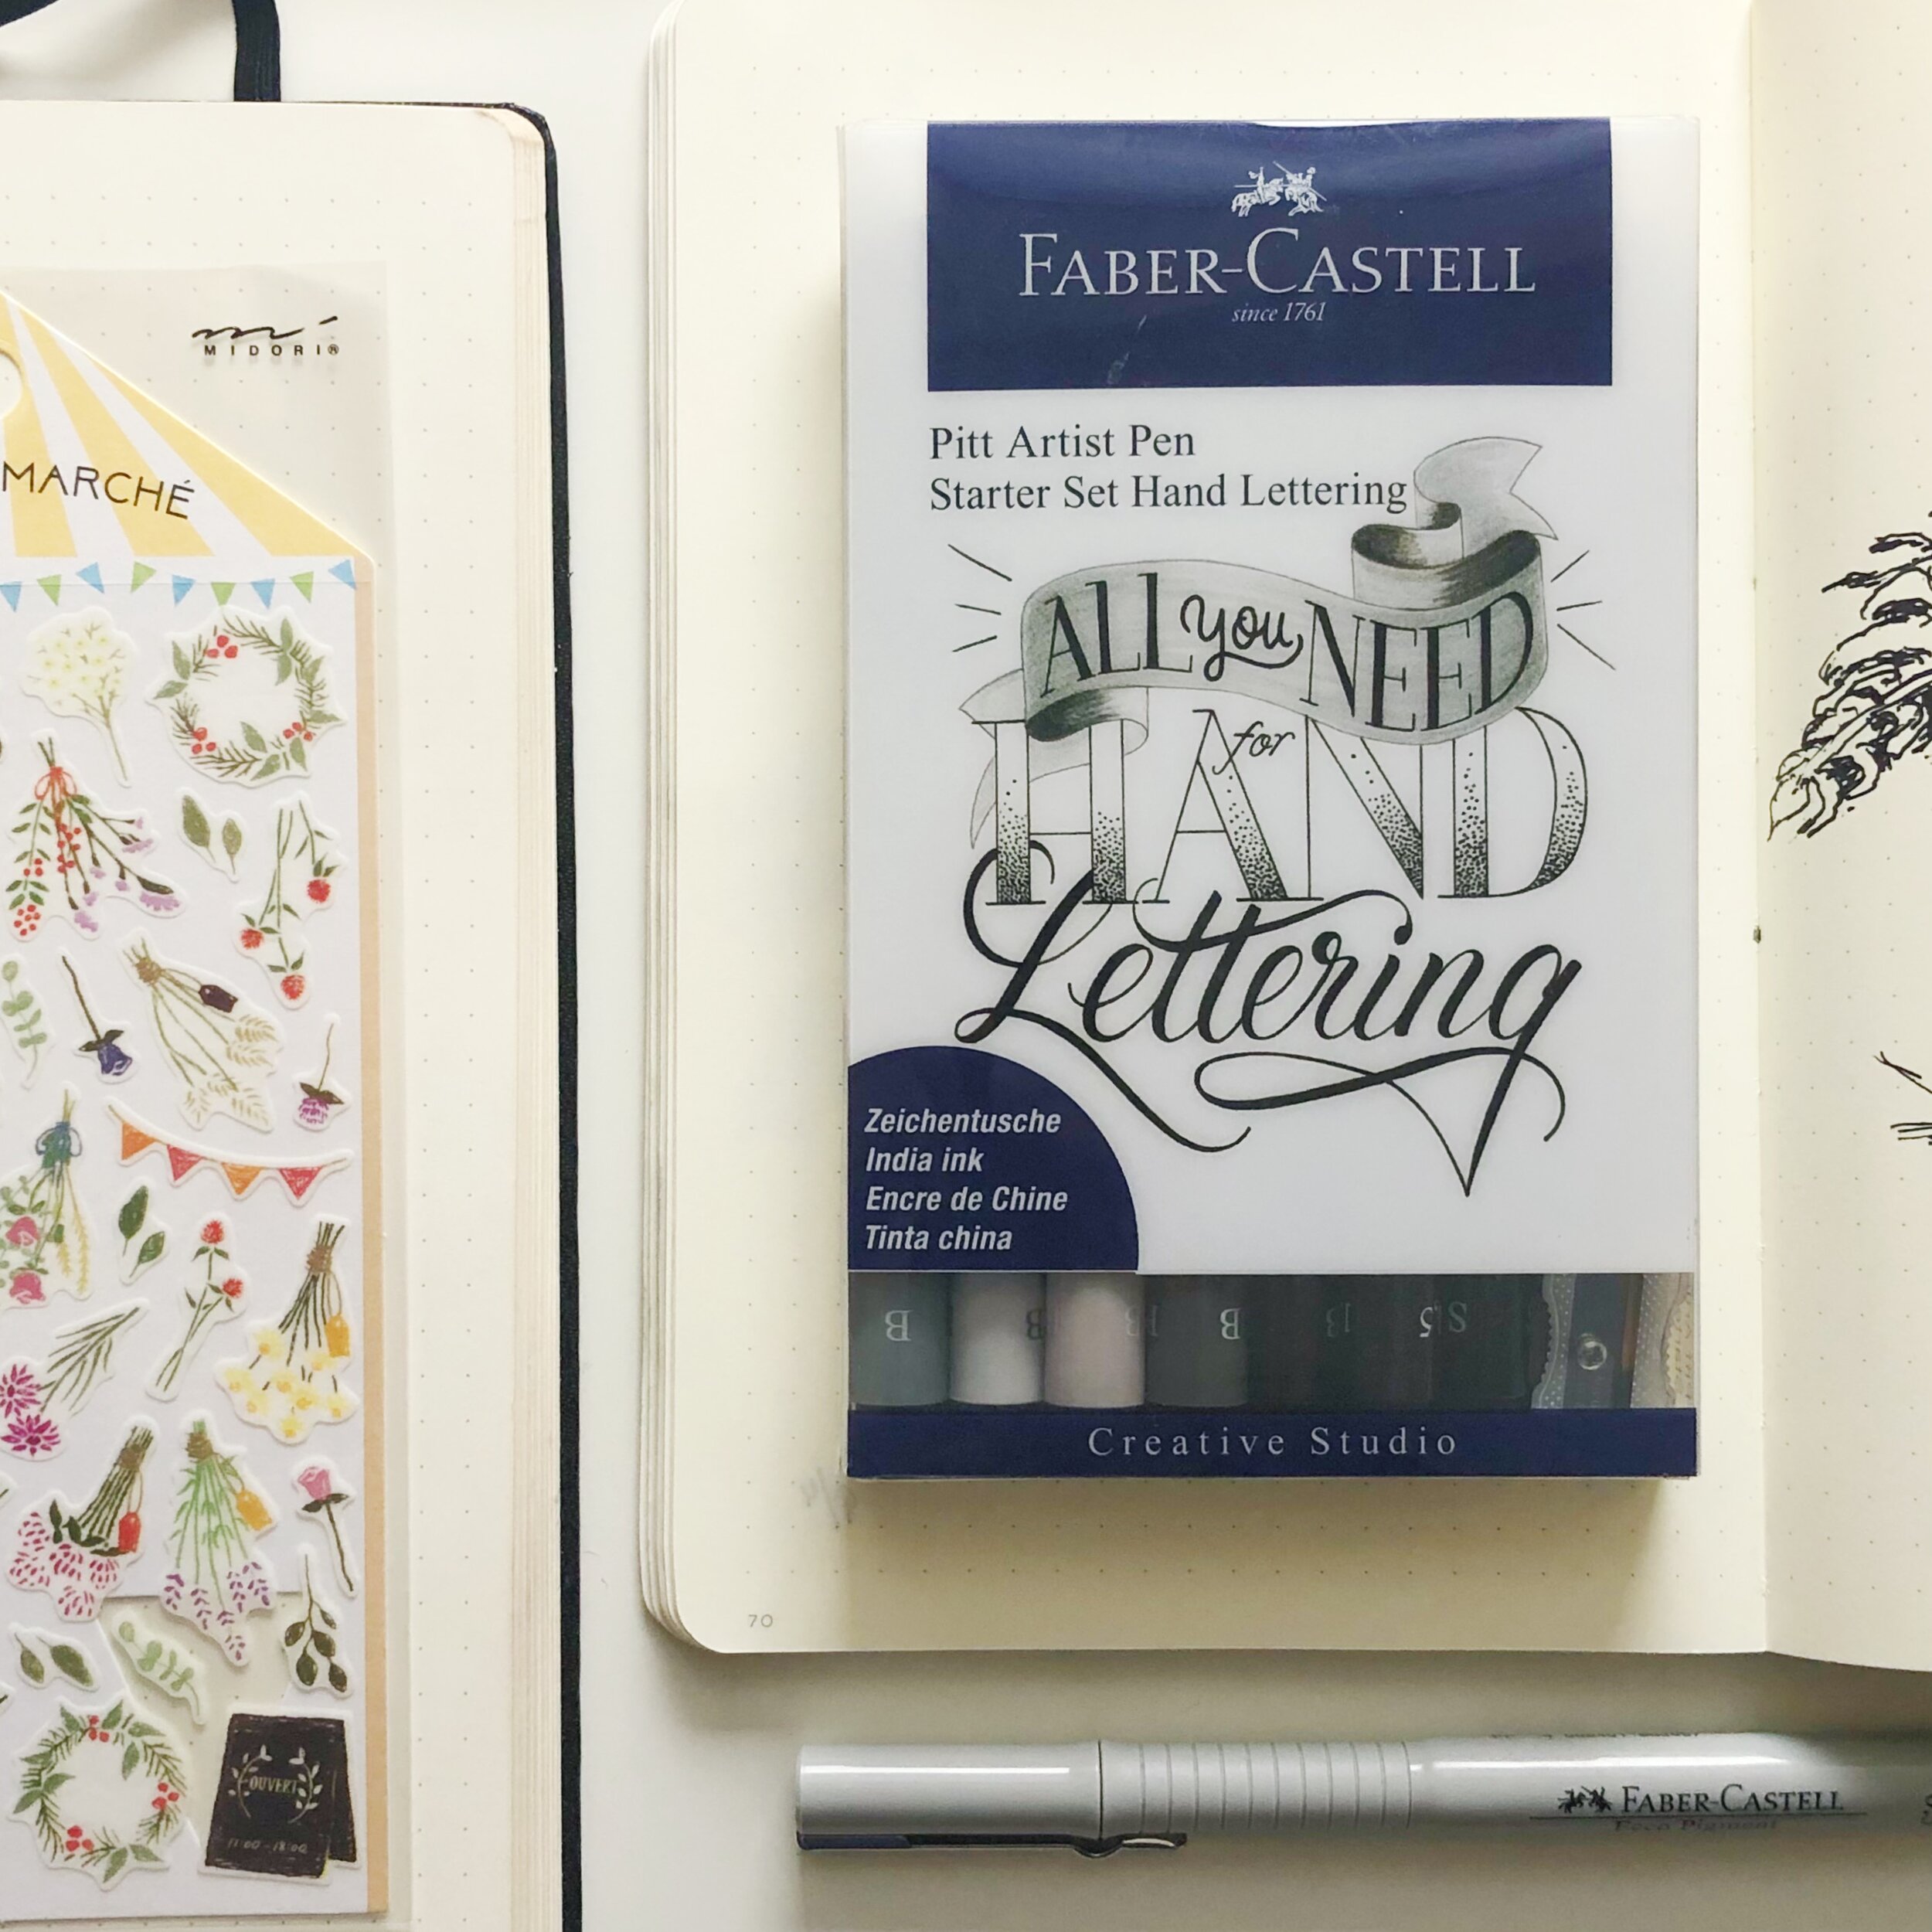 The Art Of Bullet Journaling With Fountain Pens – Bullet Journals